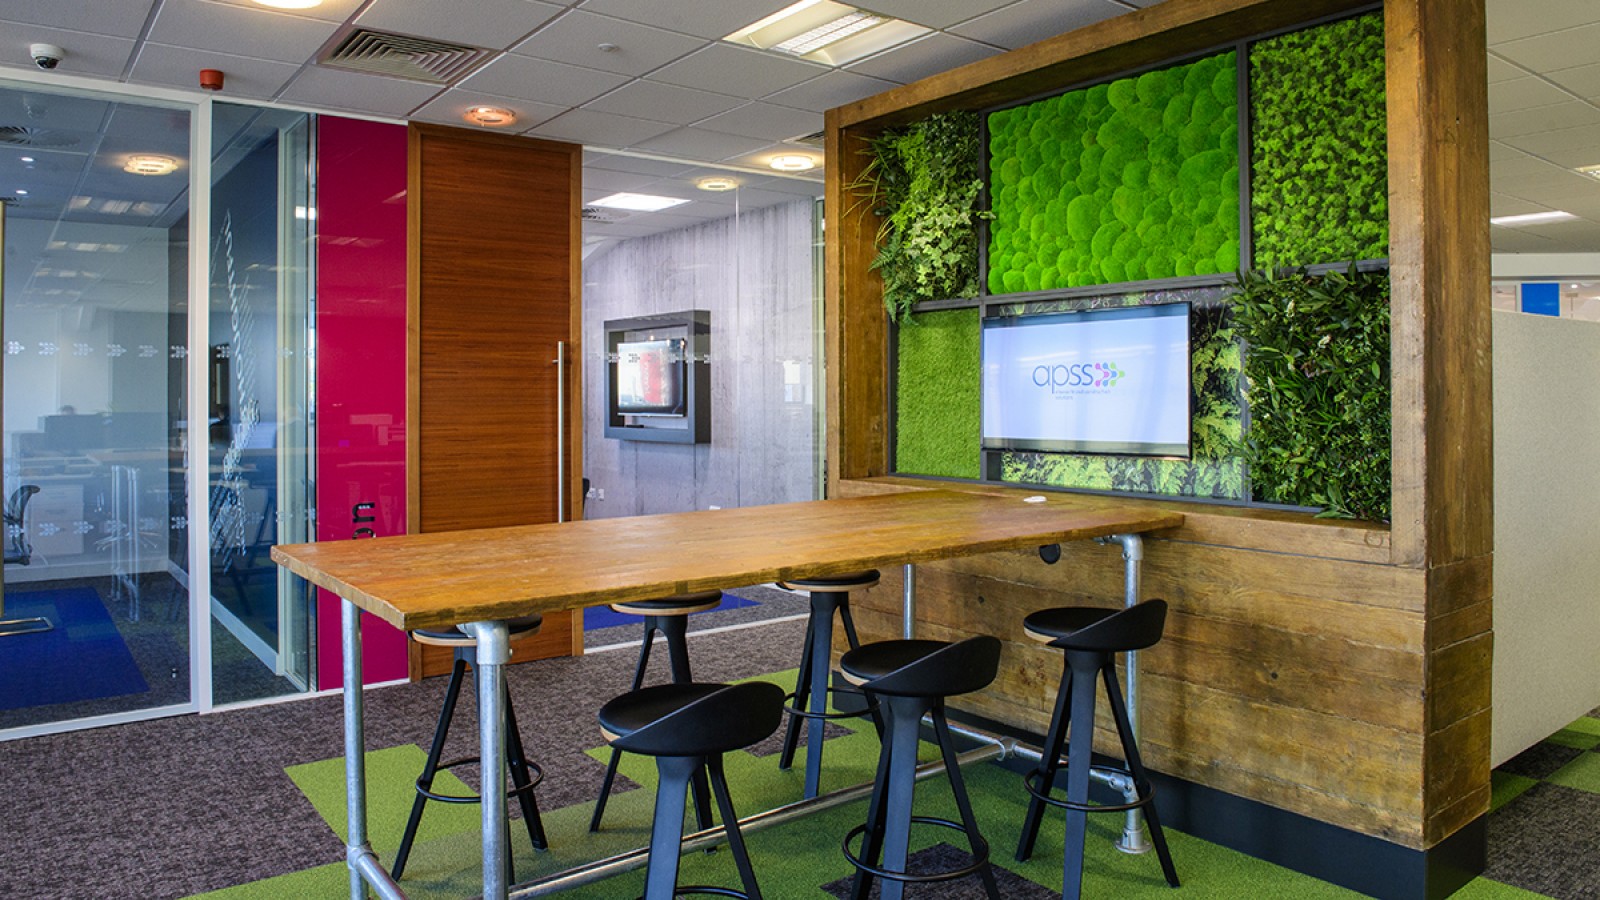 The interior of a newly refurbished office, with high table, chairs, feature wall with greenery, and screen showing APSS logo